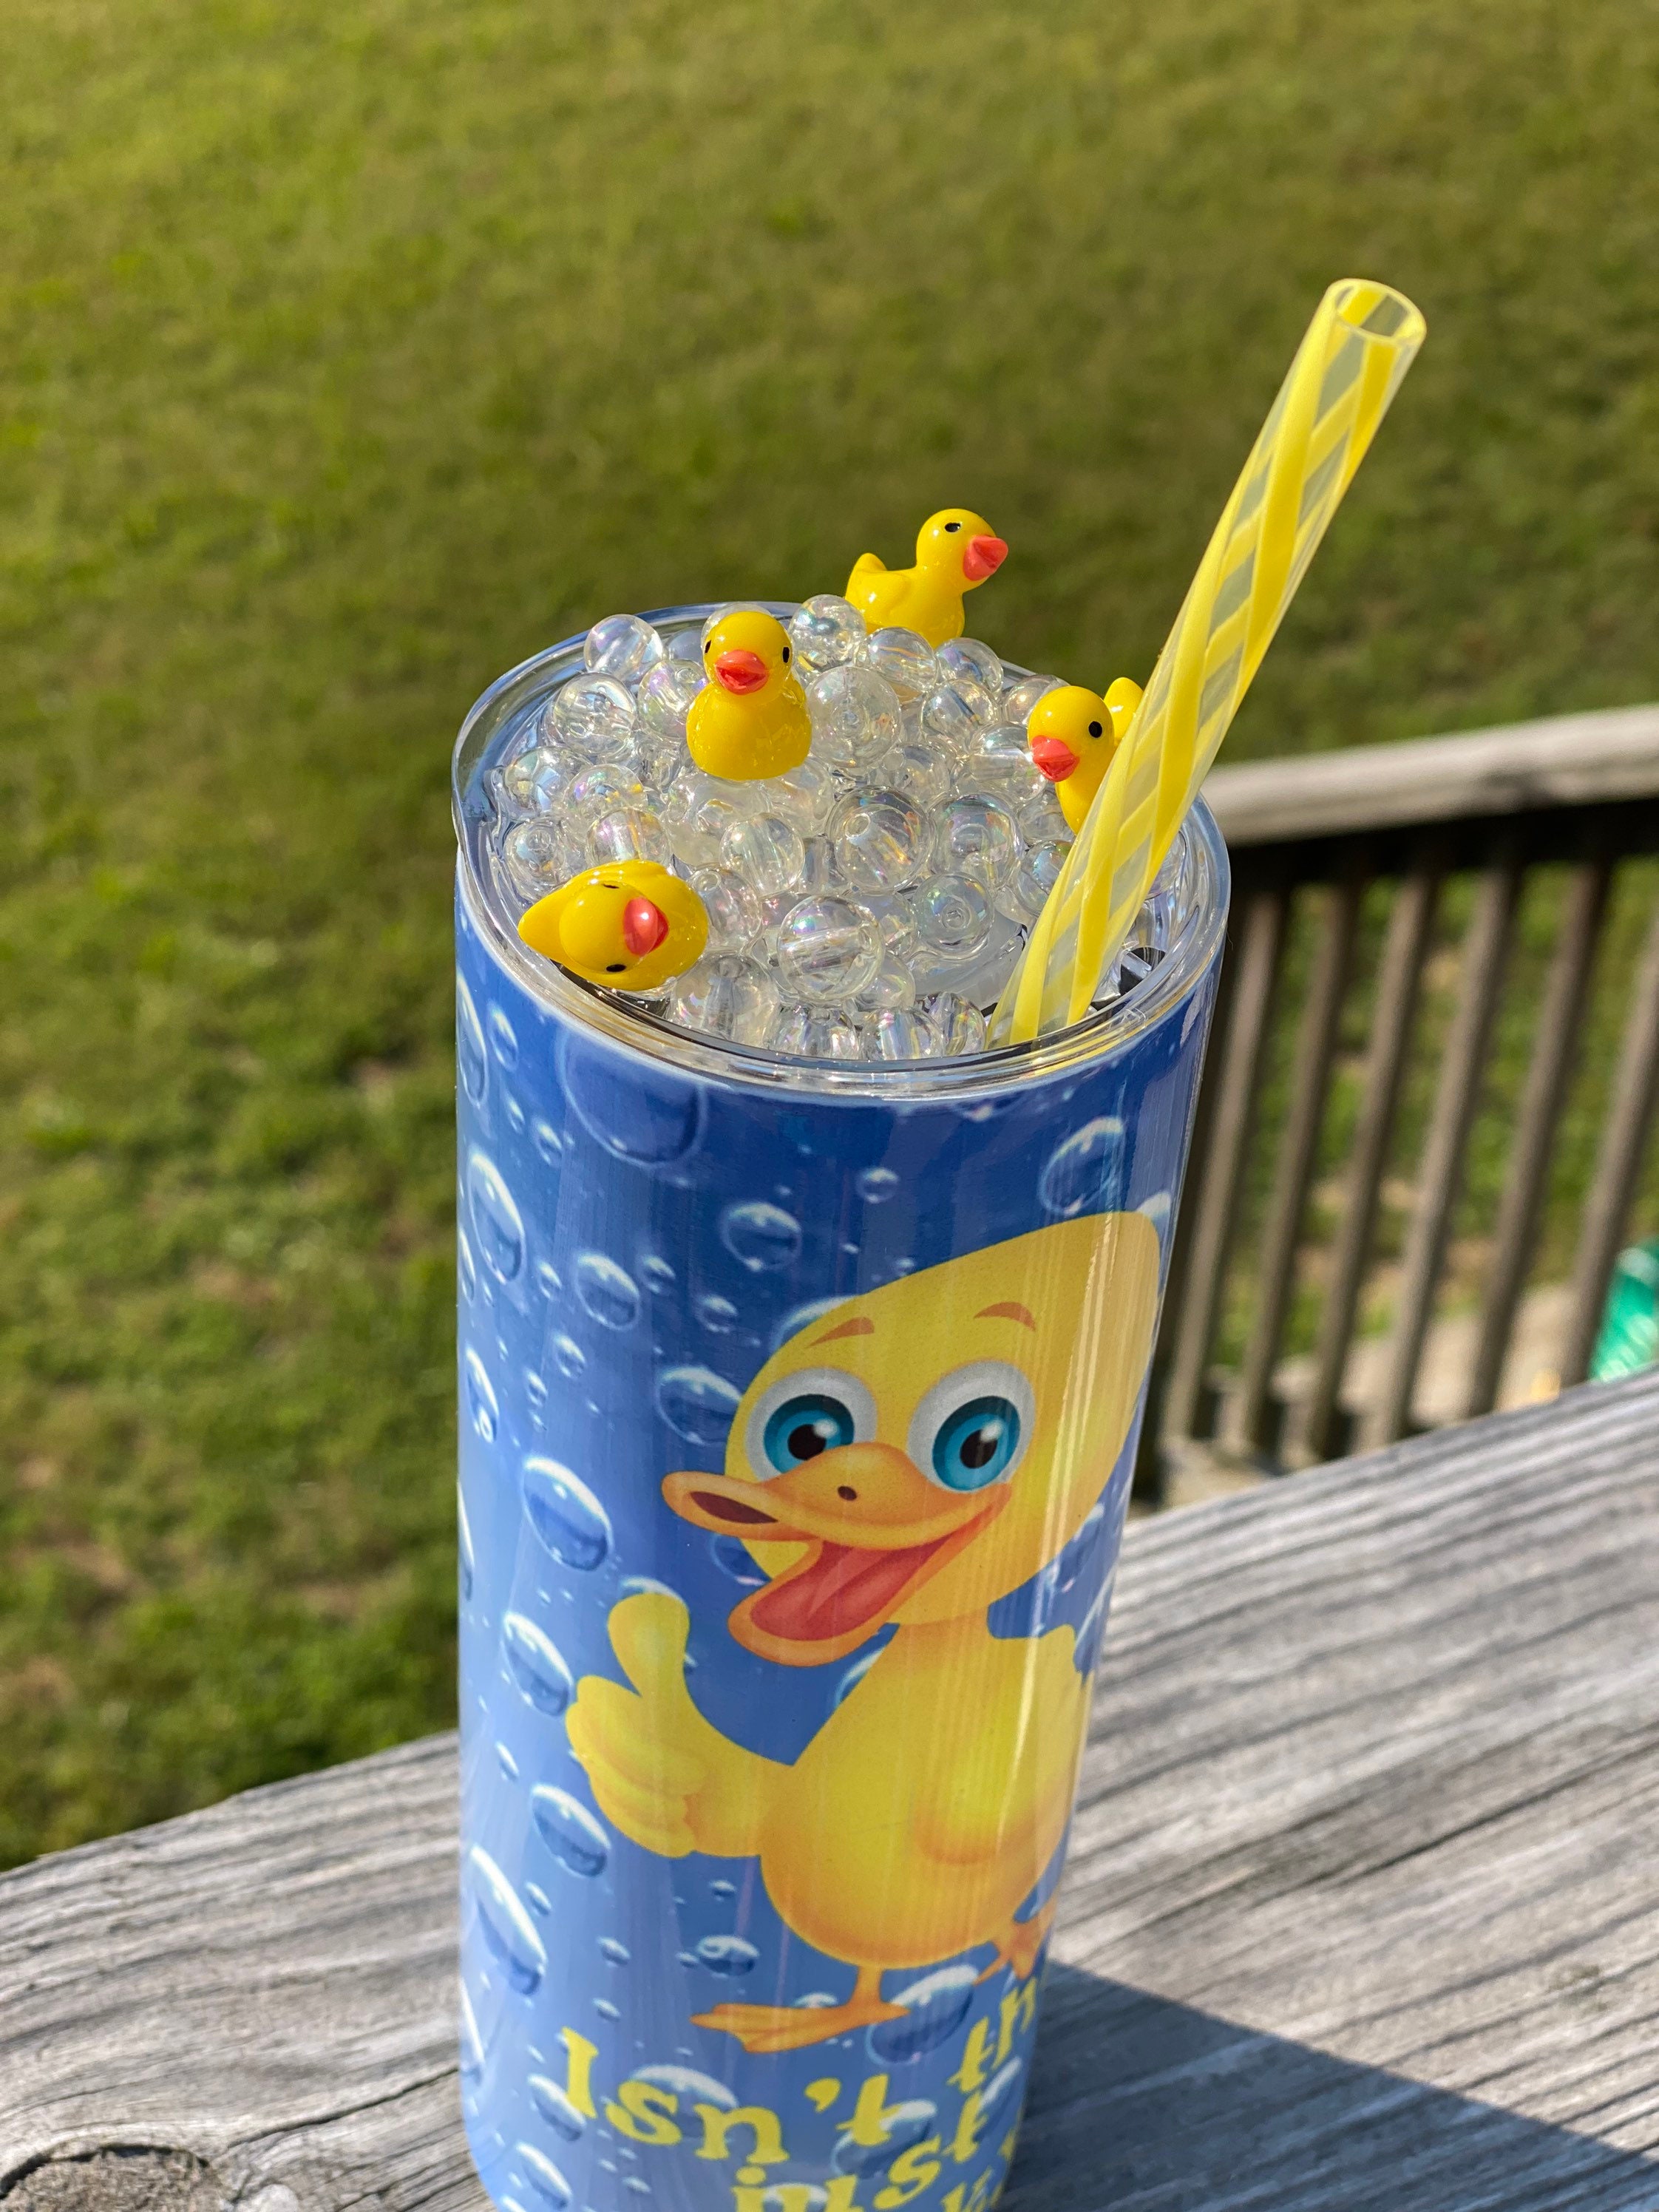 Duck Tumbler With 3D Bubble Topper | For Duck Sakes Tumbler | What The Duck  Tumbler | Duck Cup | Tumbler Topper | Rubber Ducky Tumbler